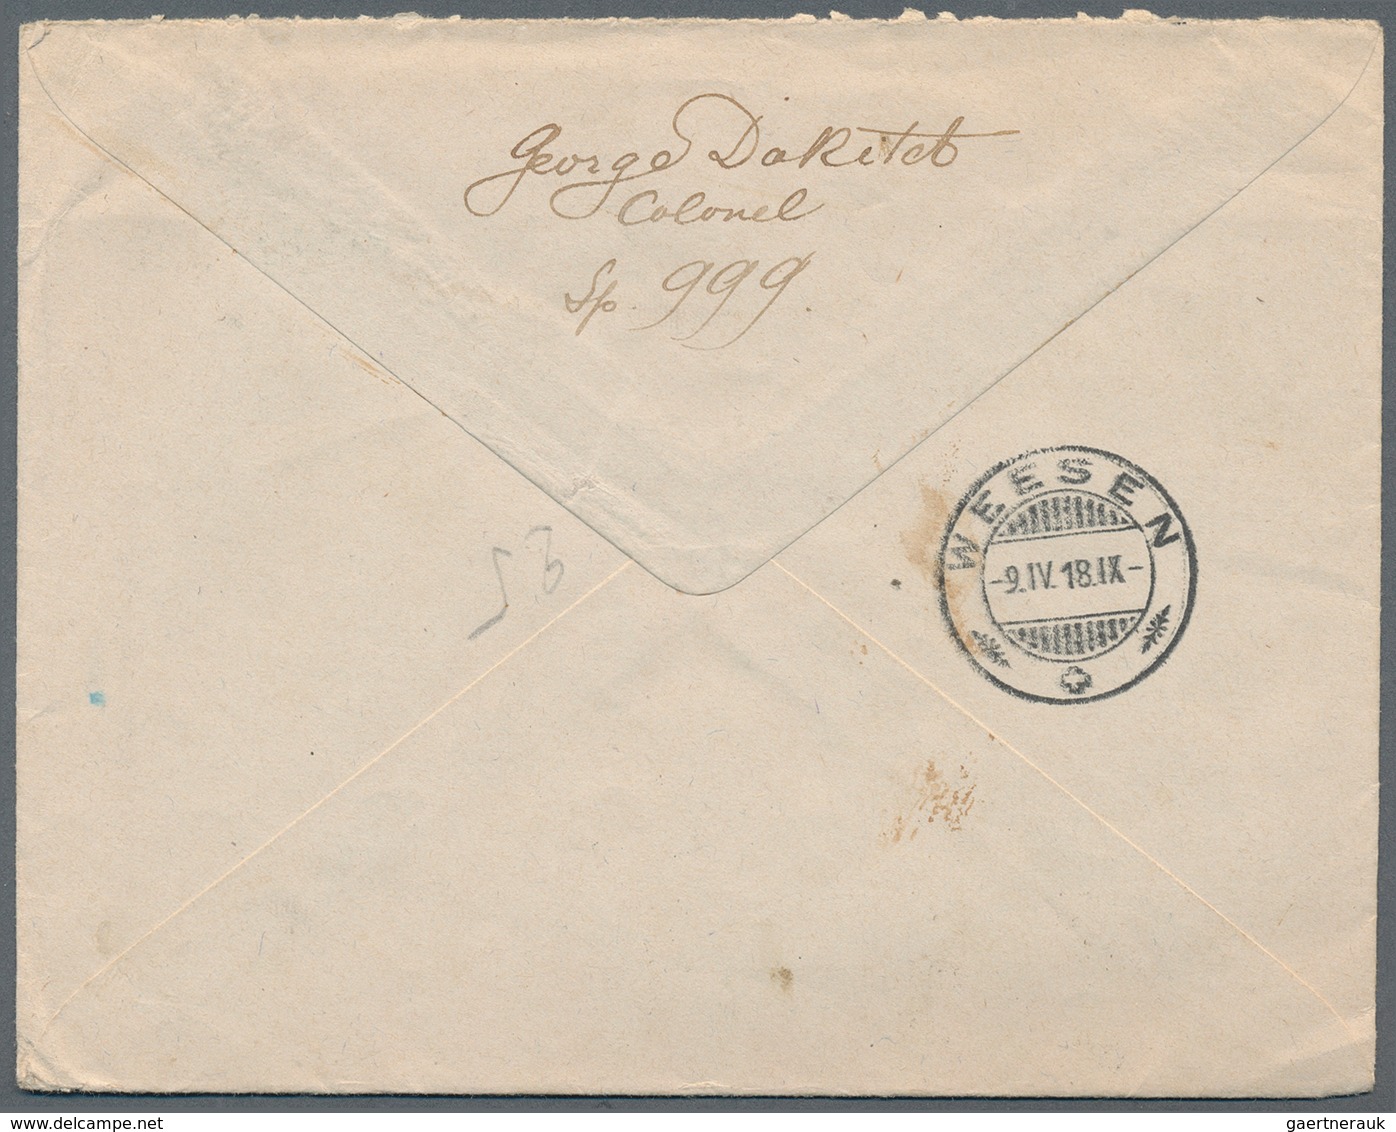 Frankreich - Militärpost / Feldpost: 1917 Two Registered Letters Of The French Troops In Serbia With - Militärische Franchisemarken